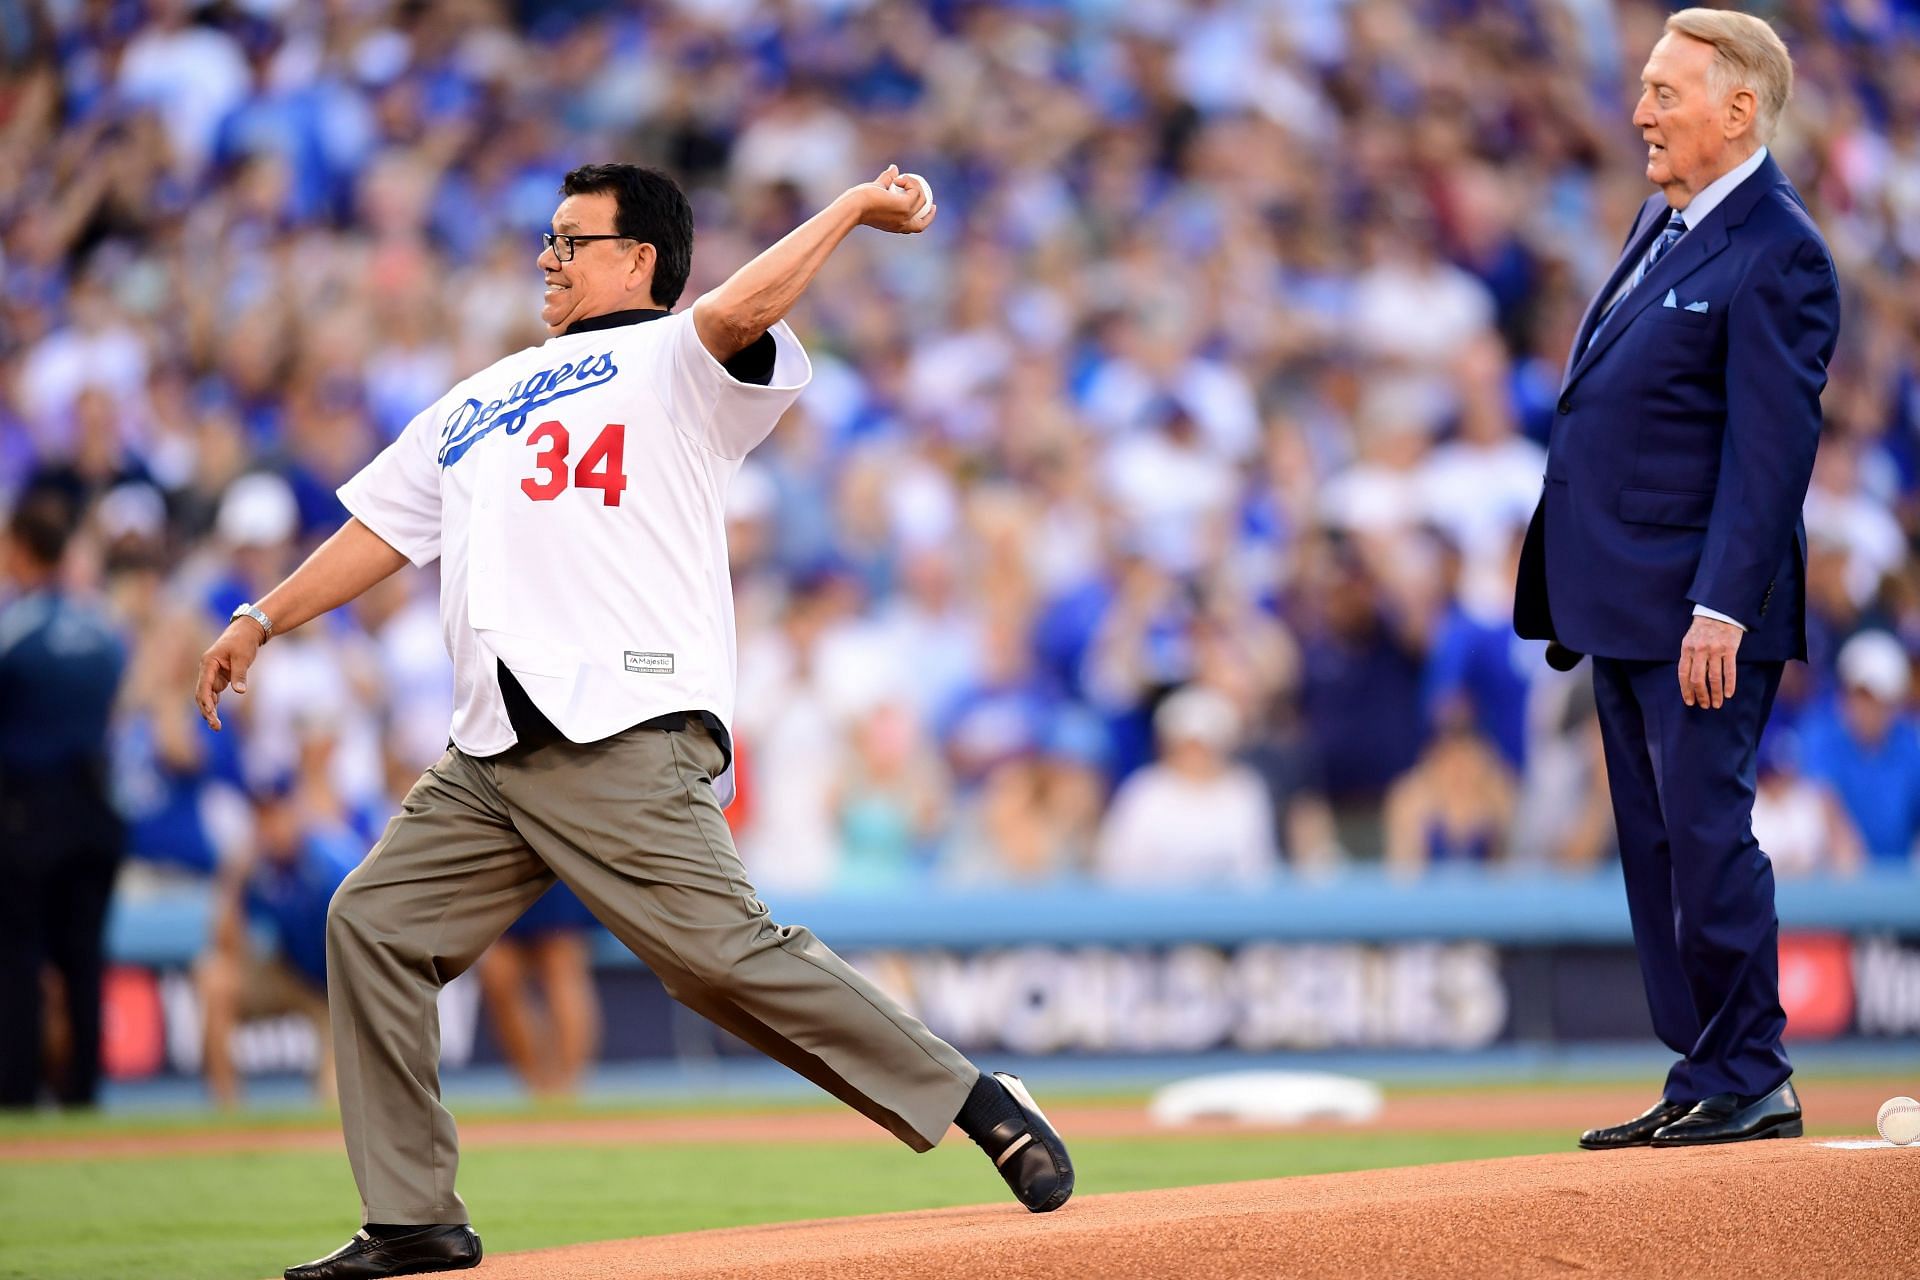 Fernando Valenzuela's iconic number 34 to be retired by Dodgers